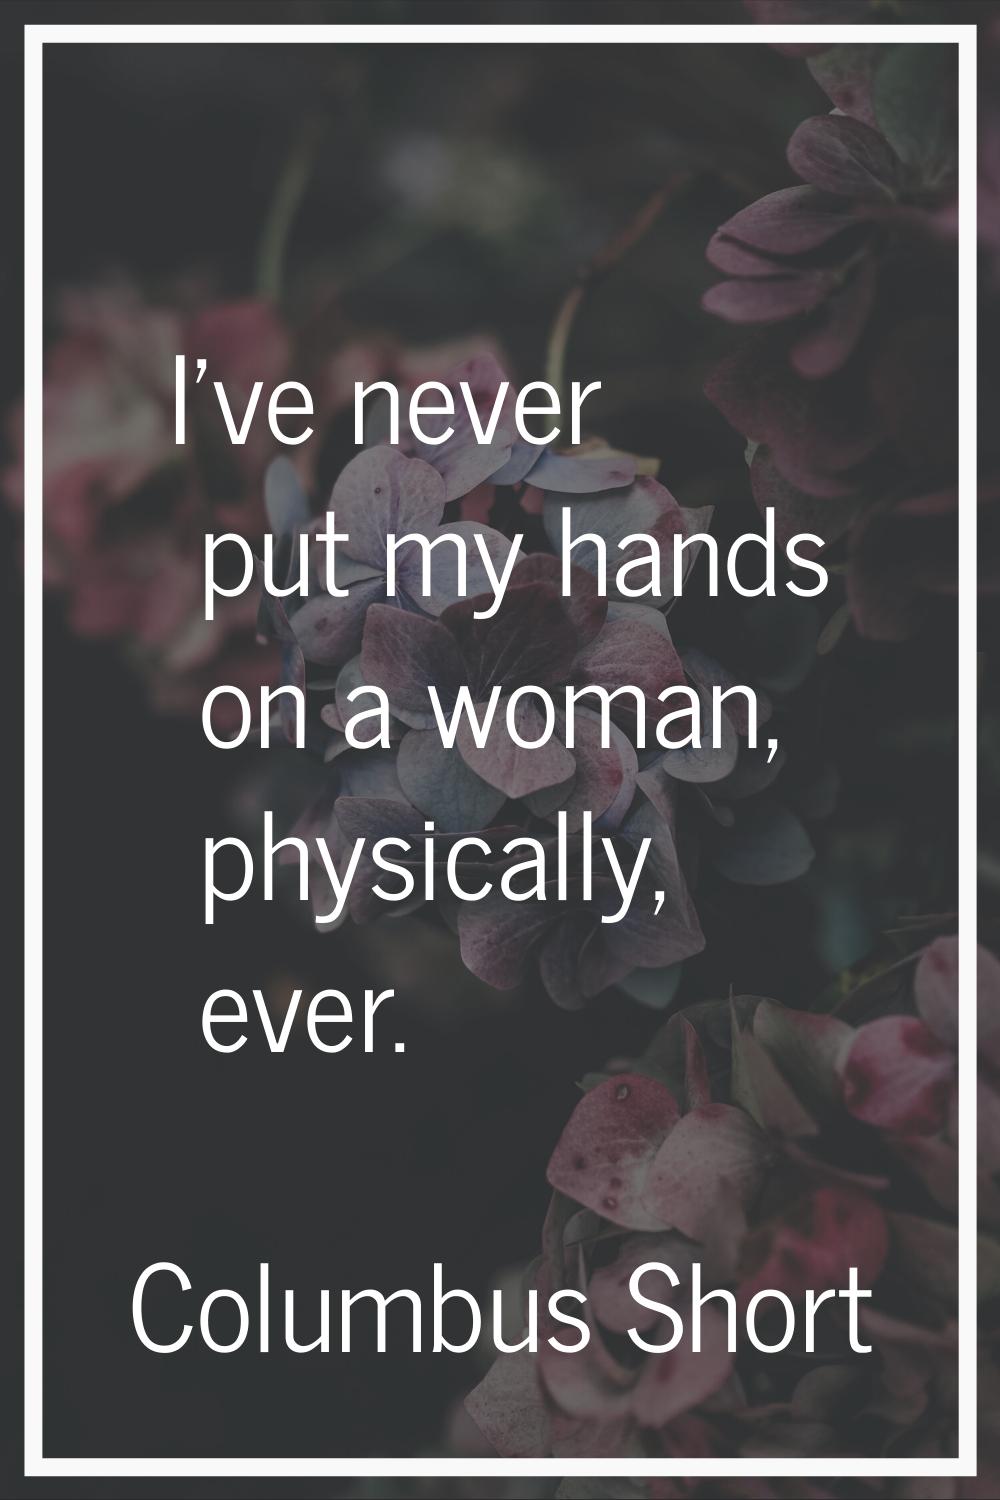 I've never put my hands on a woman, physically, ever.